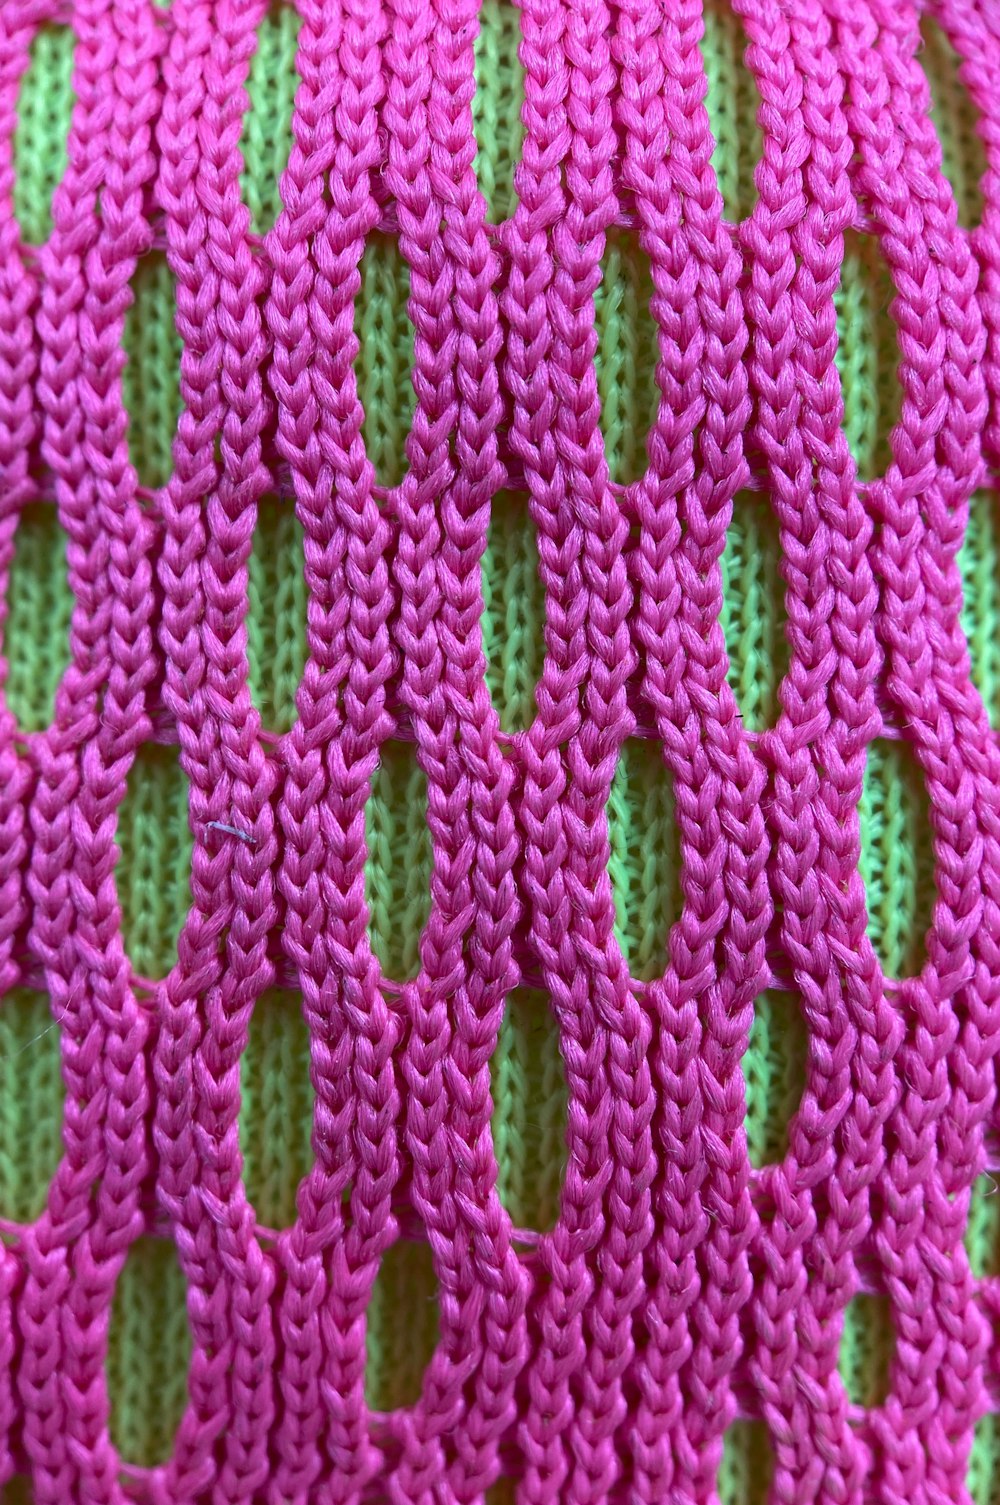 pink and green knit textile